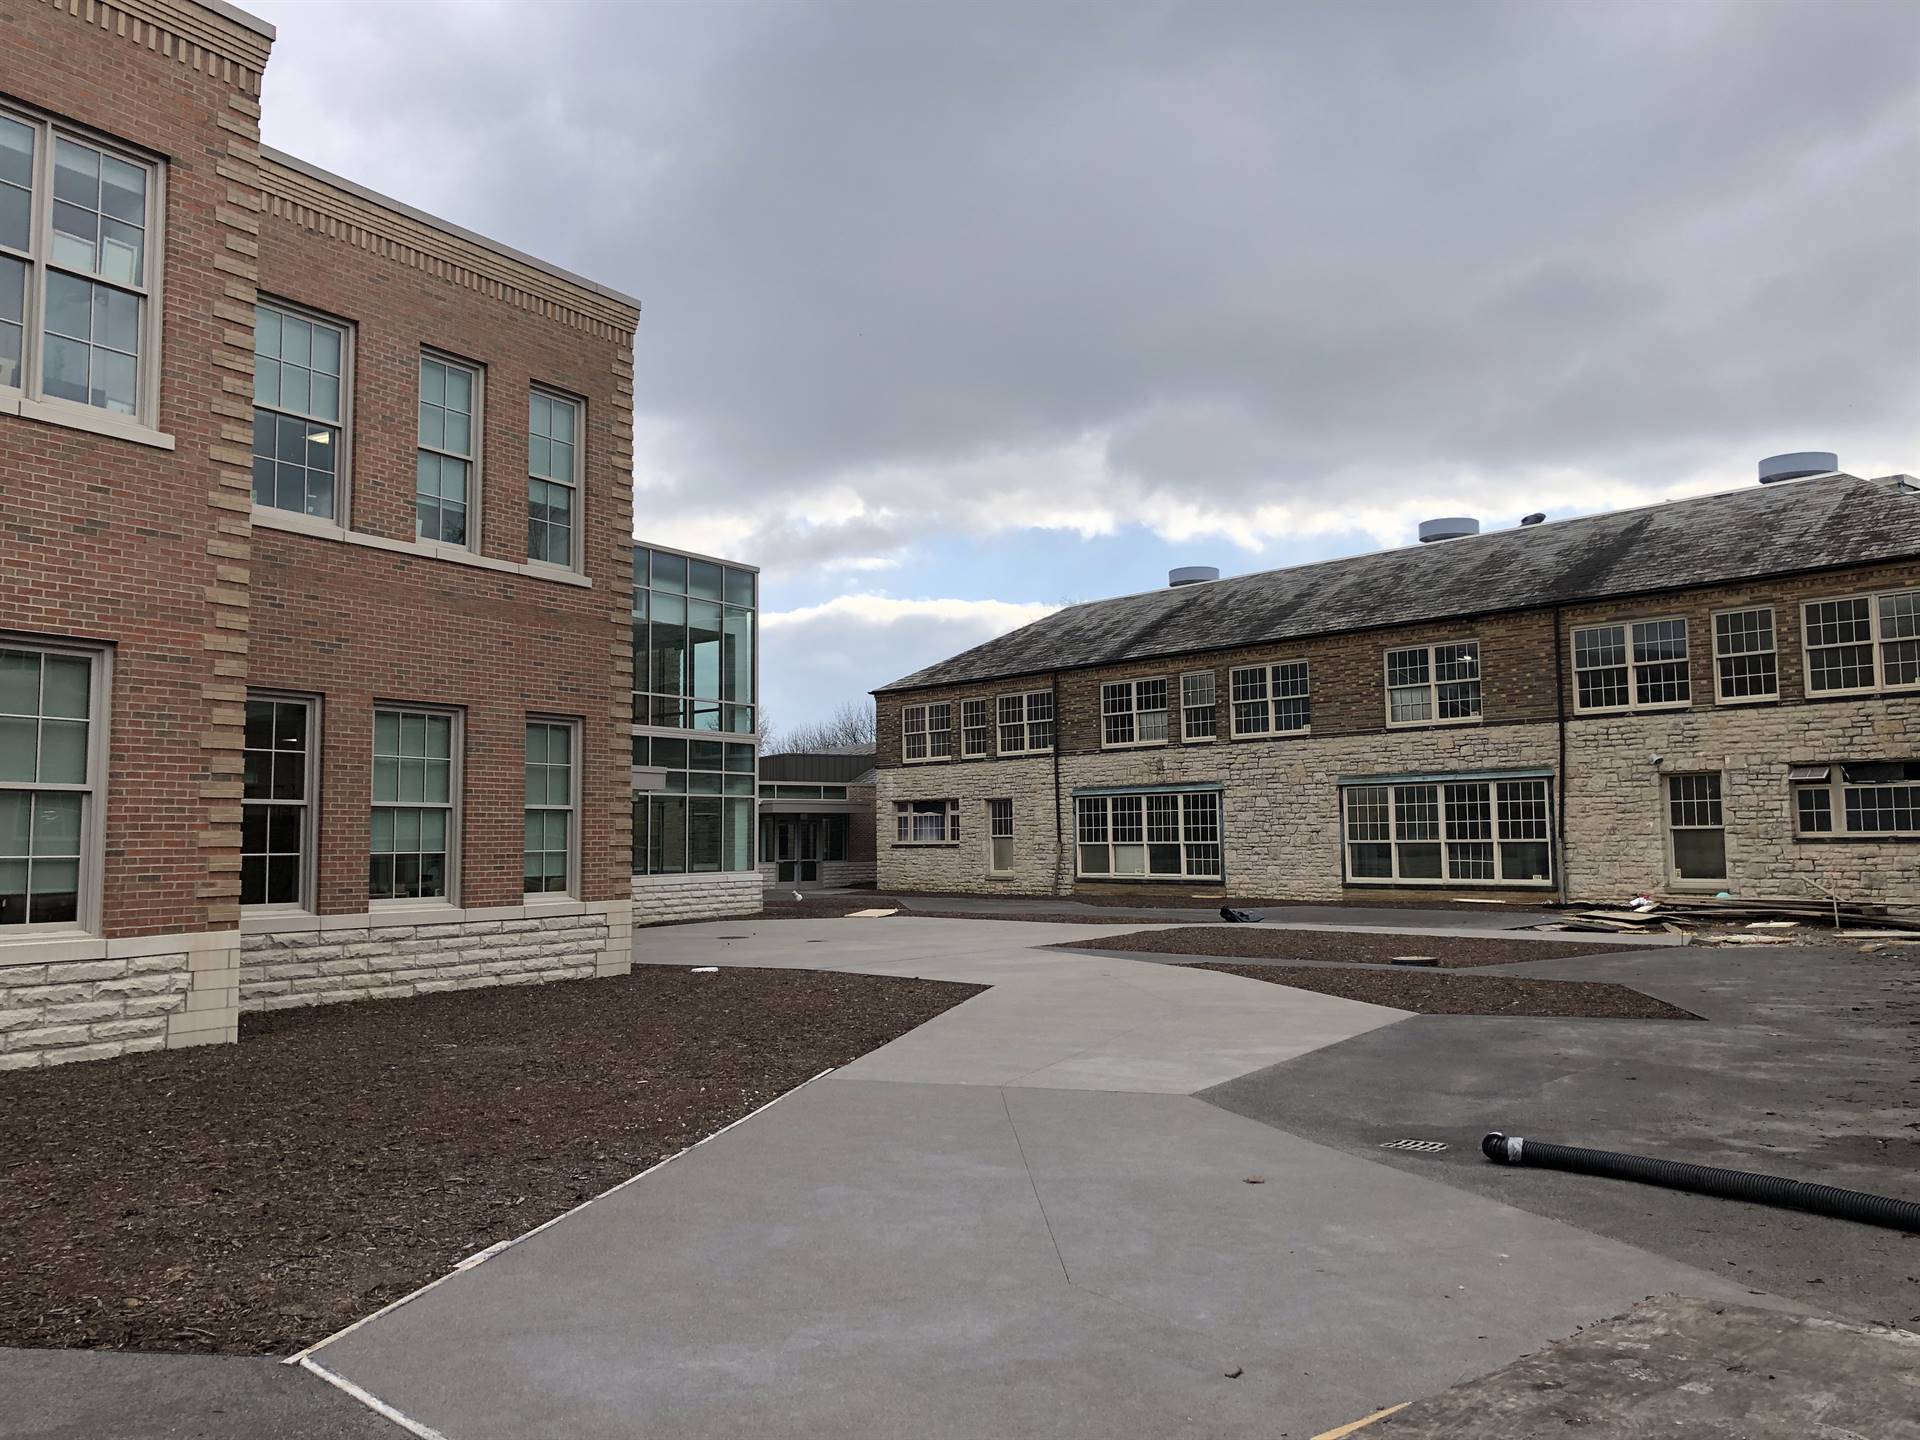 A view of the new courtyard at Barrington Elementary School